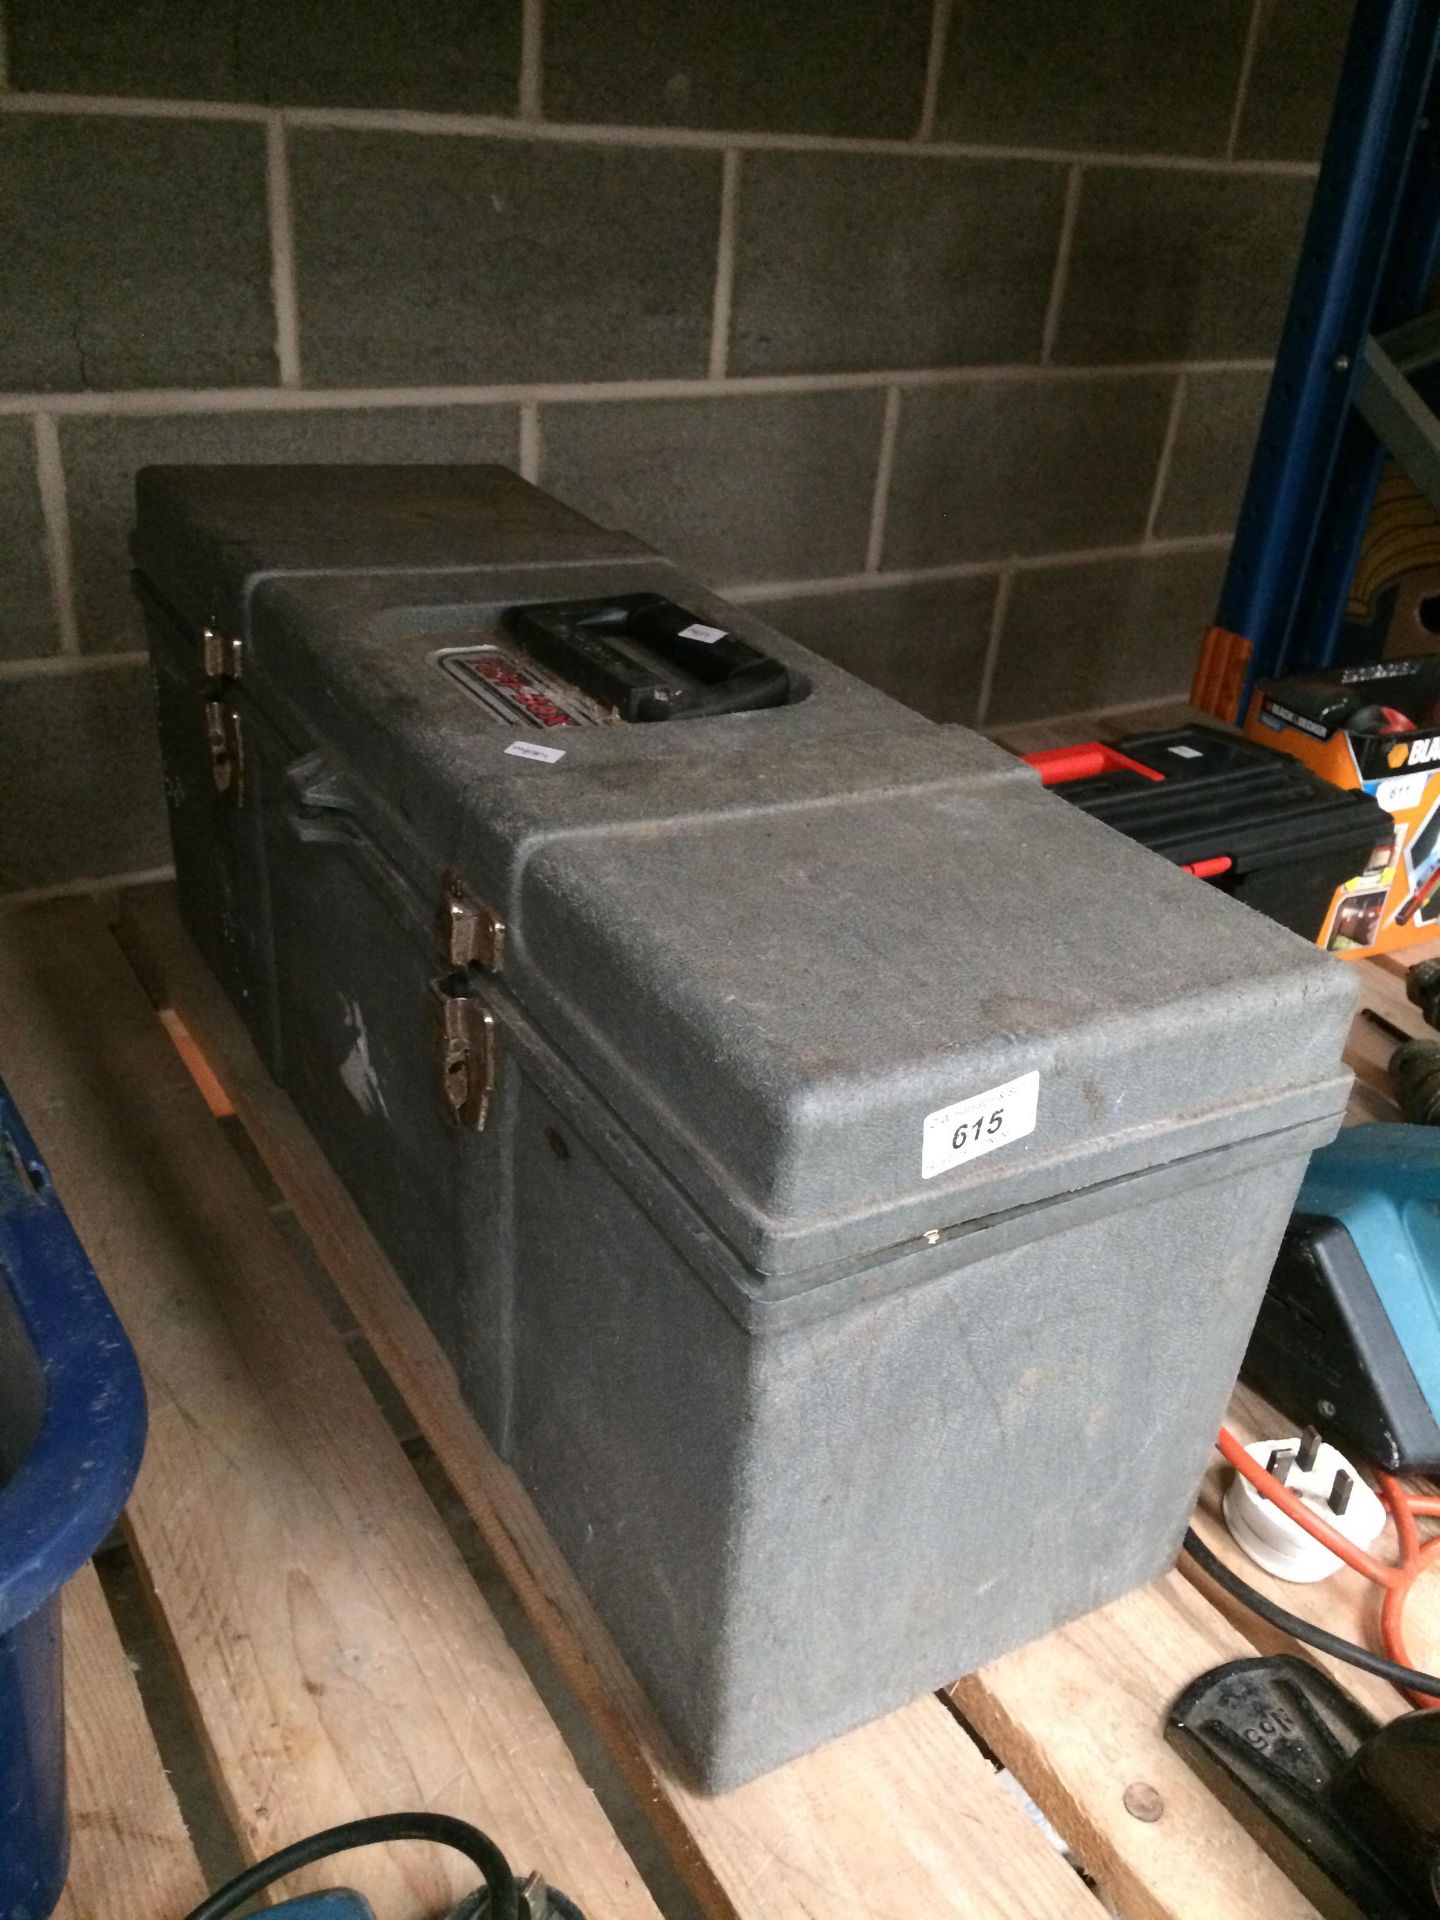 Large grey plastic tool box together with contents - hammer, spirit level etc.